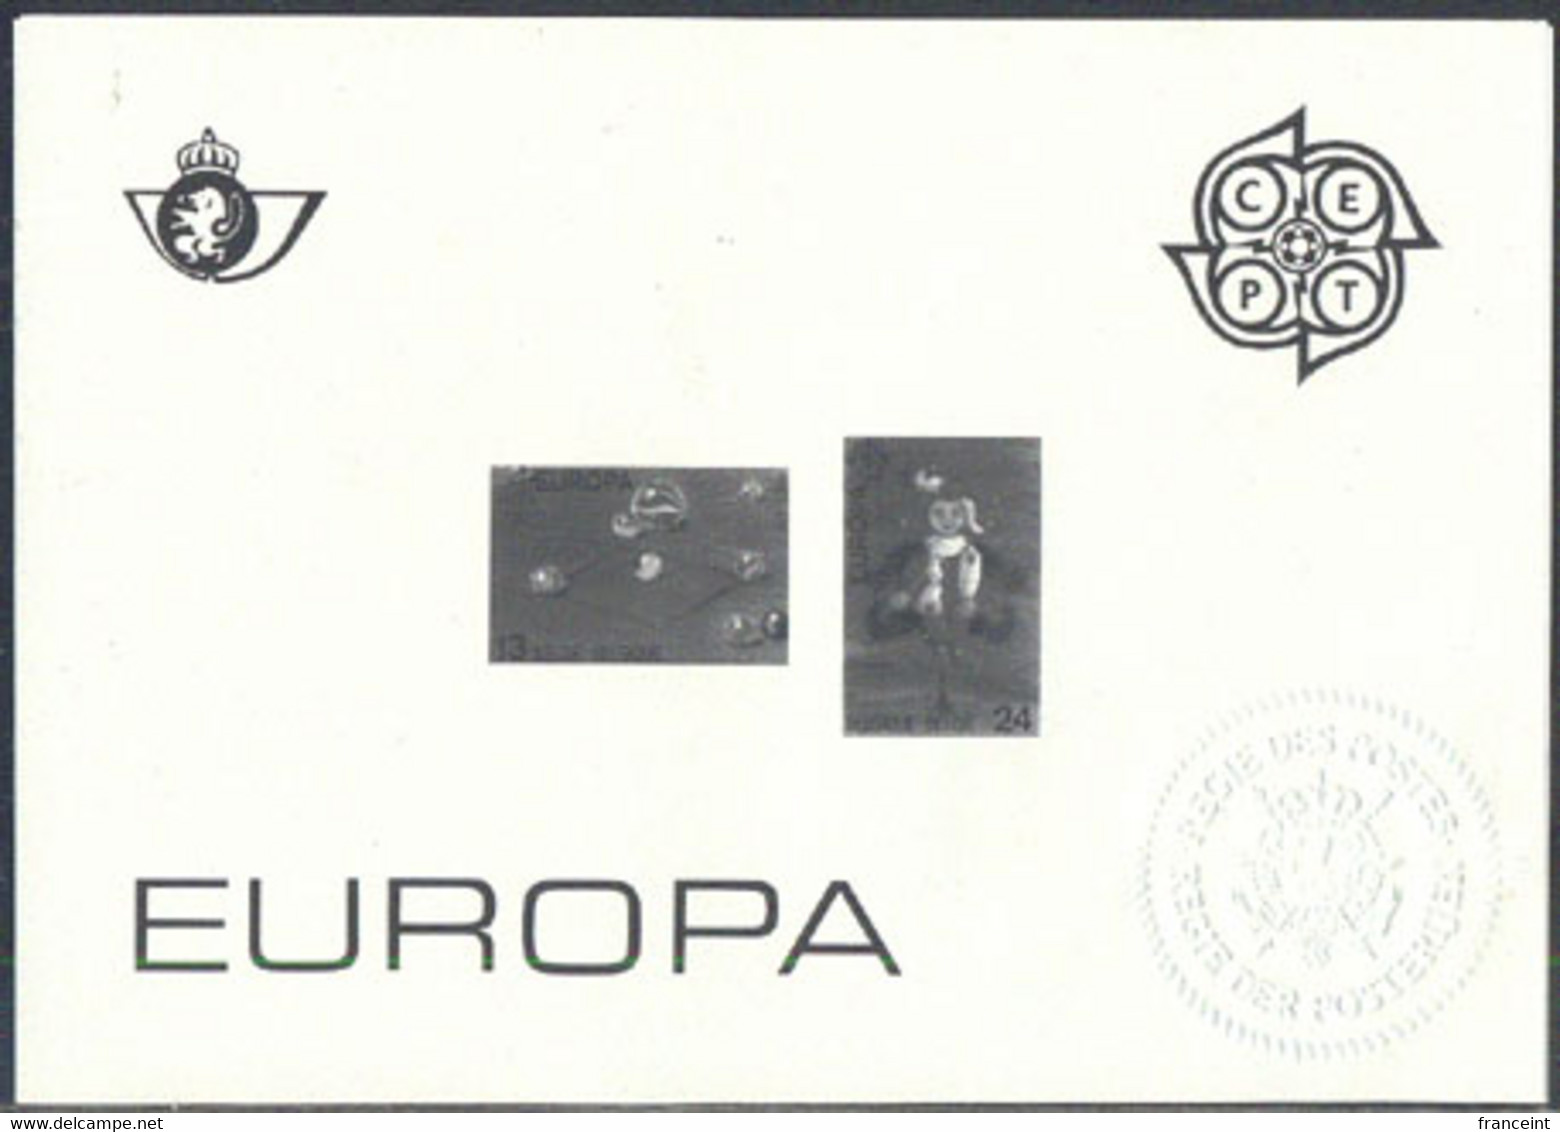 BELGIUM (1989) Marbles. Jumping Jack. Monochrome Compound Proof Sheet With Ministerial Seal. Scott Nos 1312-3 - Proeven & Herdruk